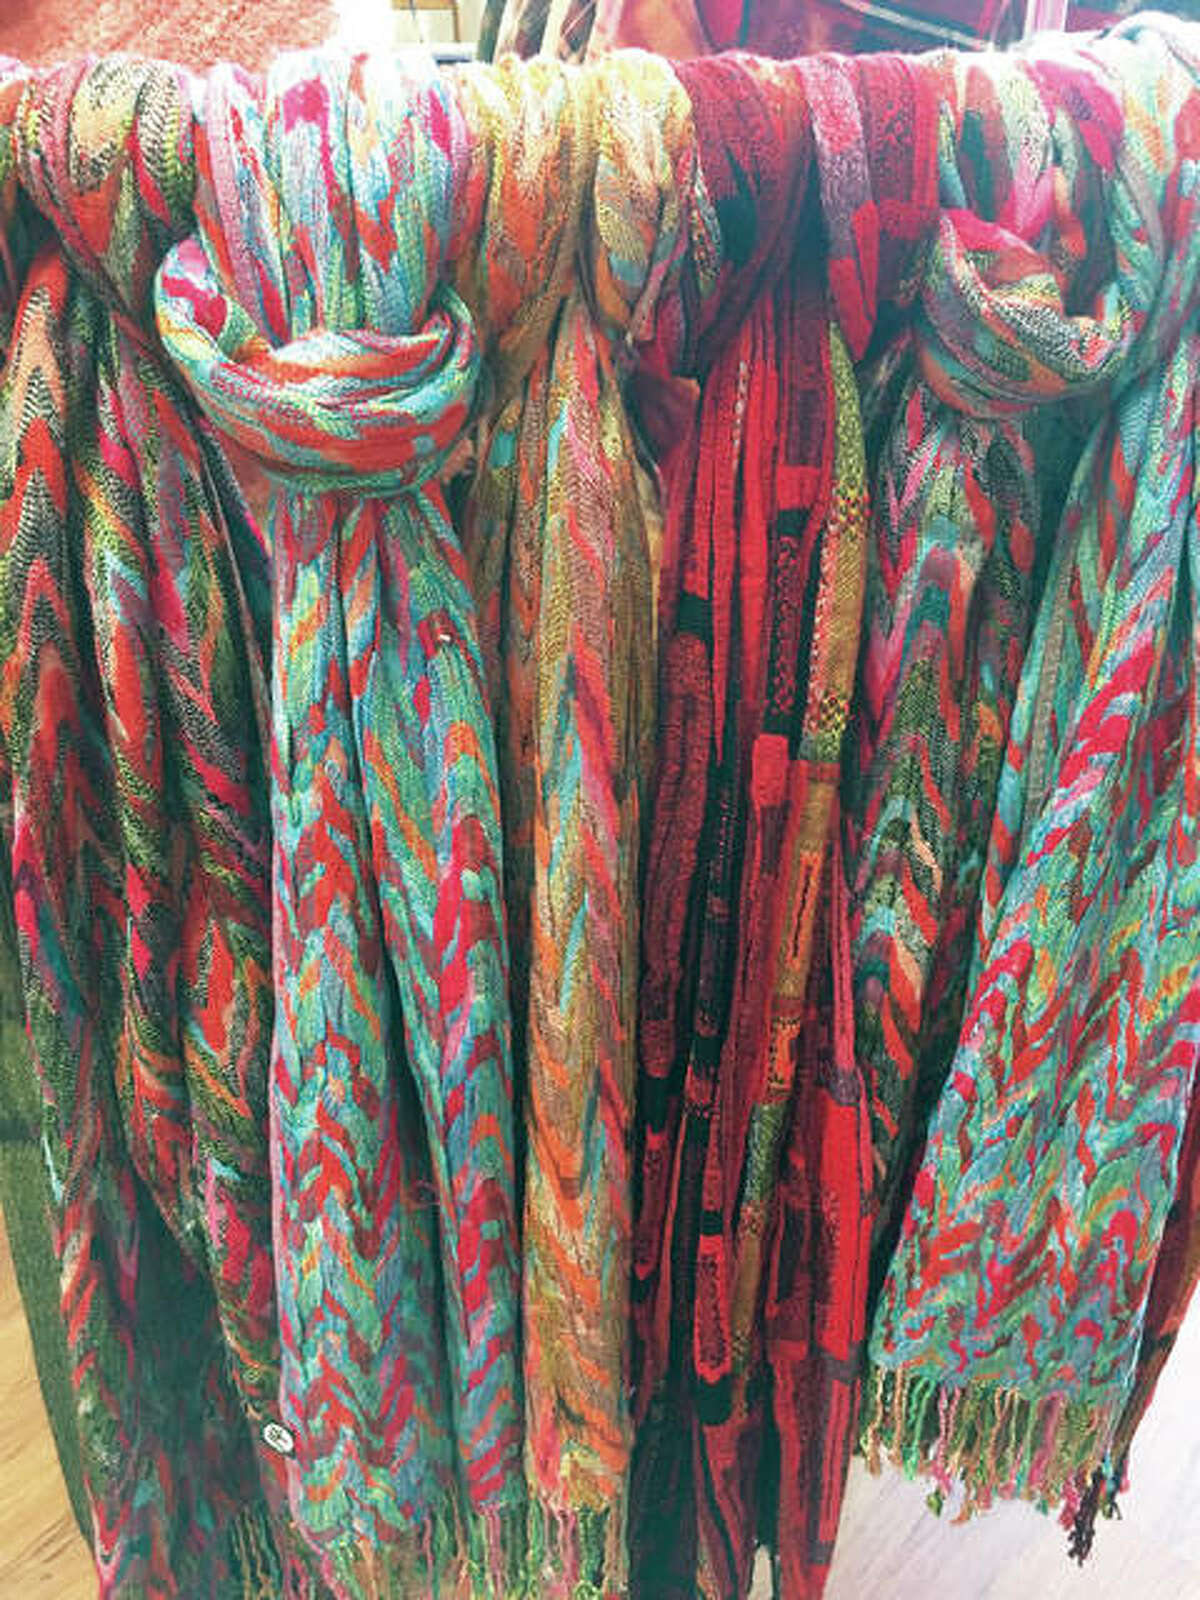 Wood River’s Country Meadows carries stylish woven scarves, faux fur ponchos and much more.